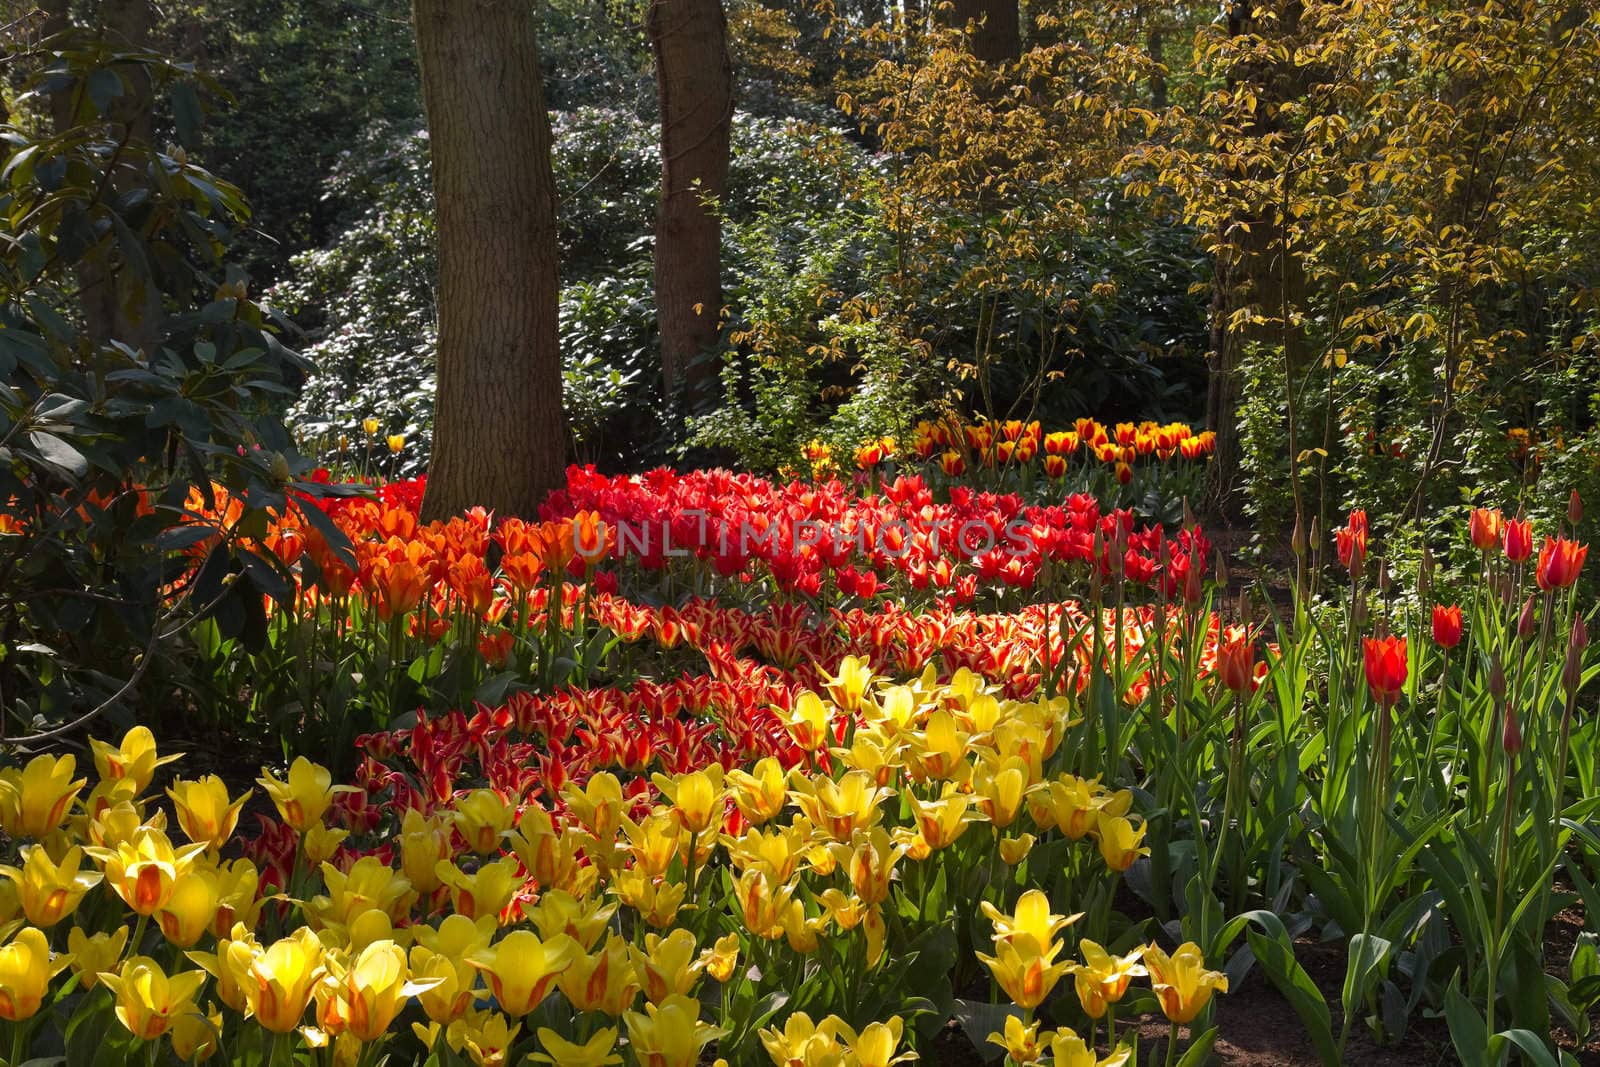 Garden with lots of colorful tulips by Colette